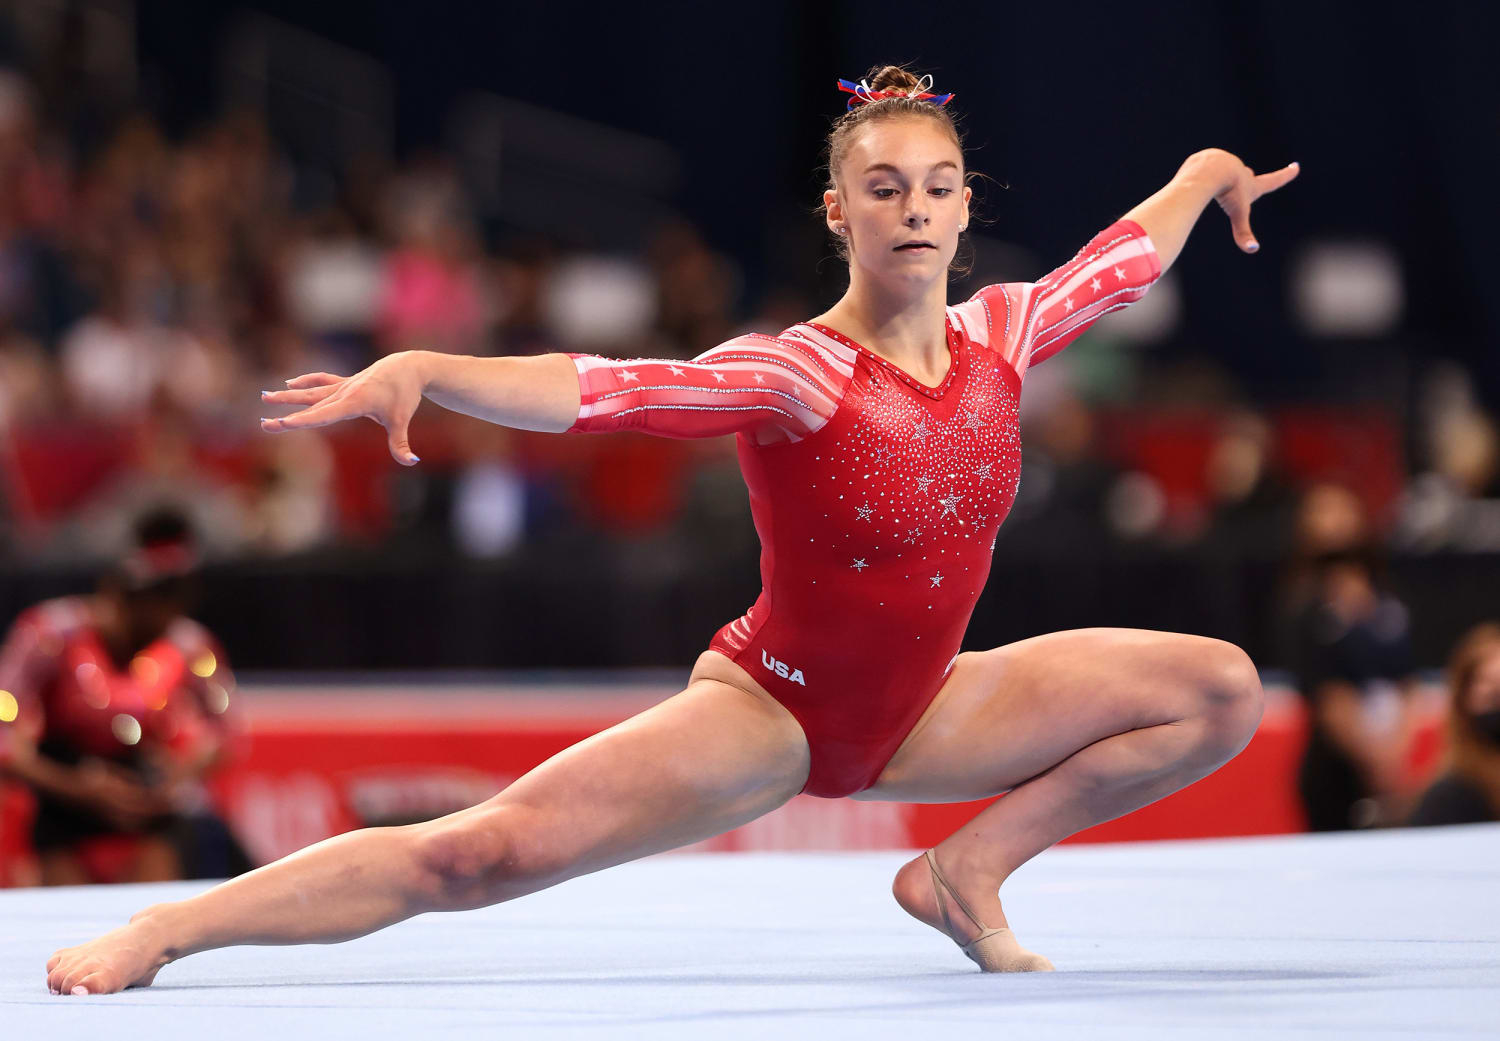 Meet The 6 Gymnasts Who Will Lead Team Usa At The Olympics